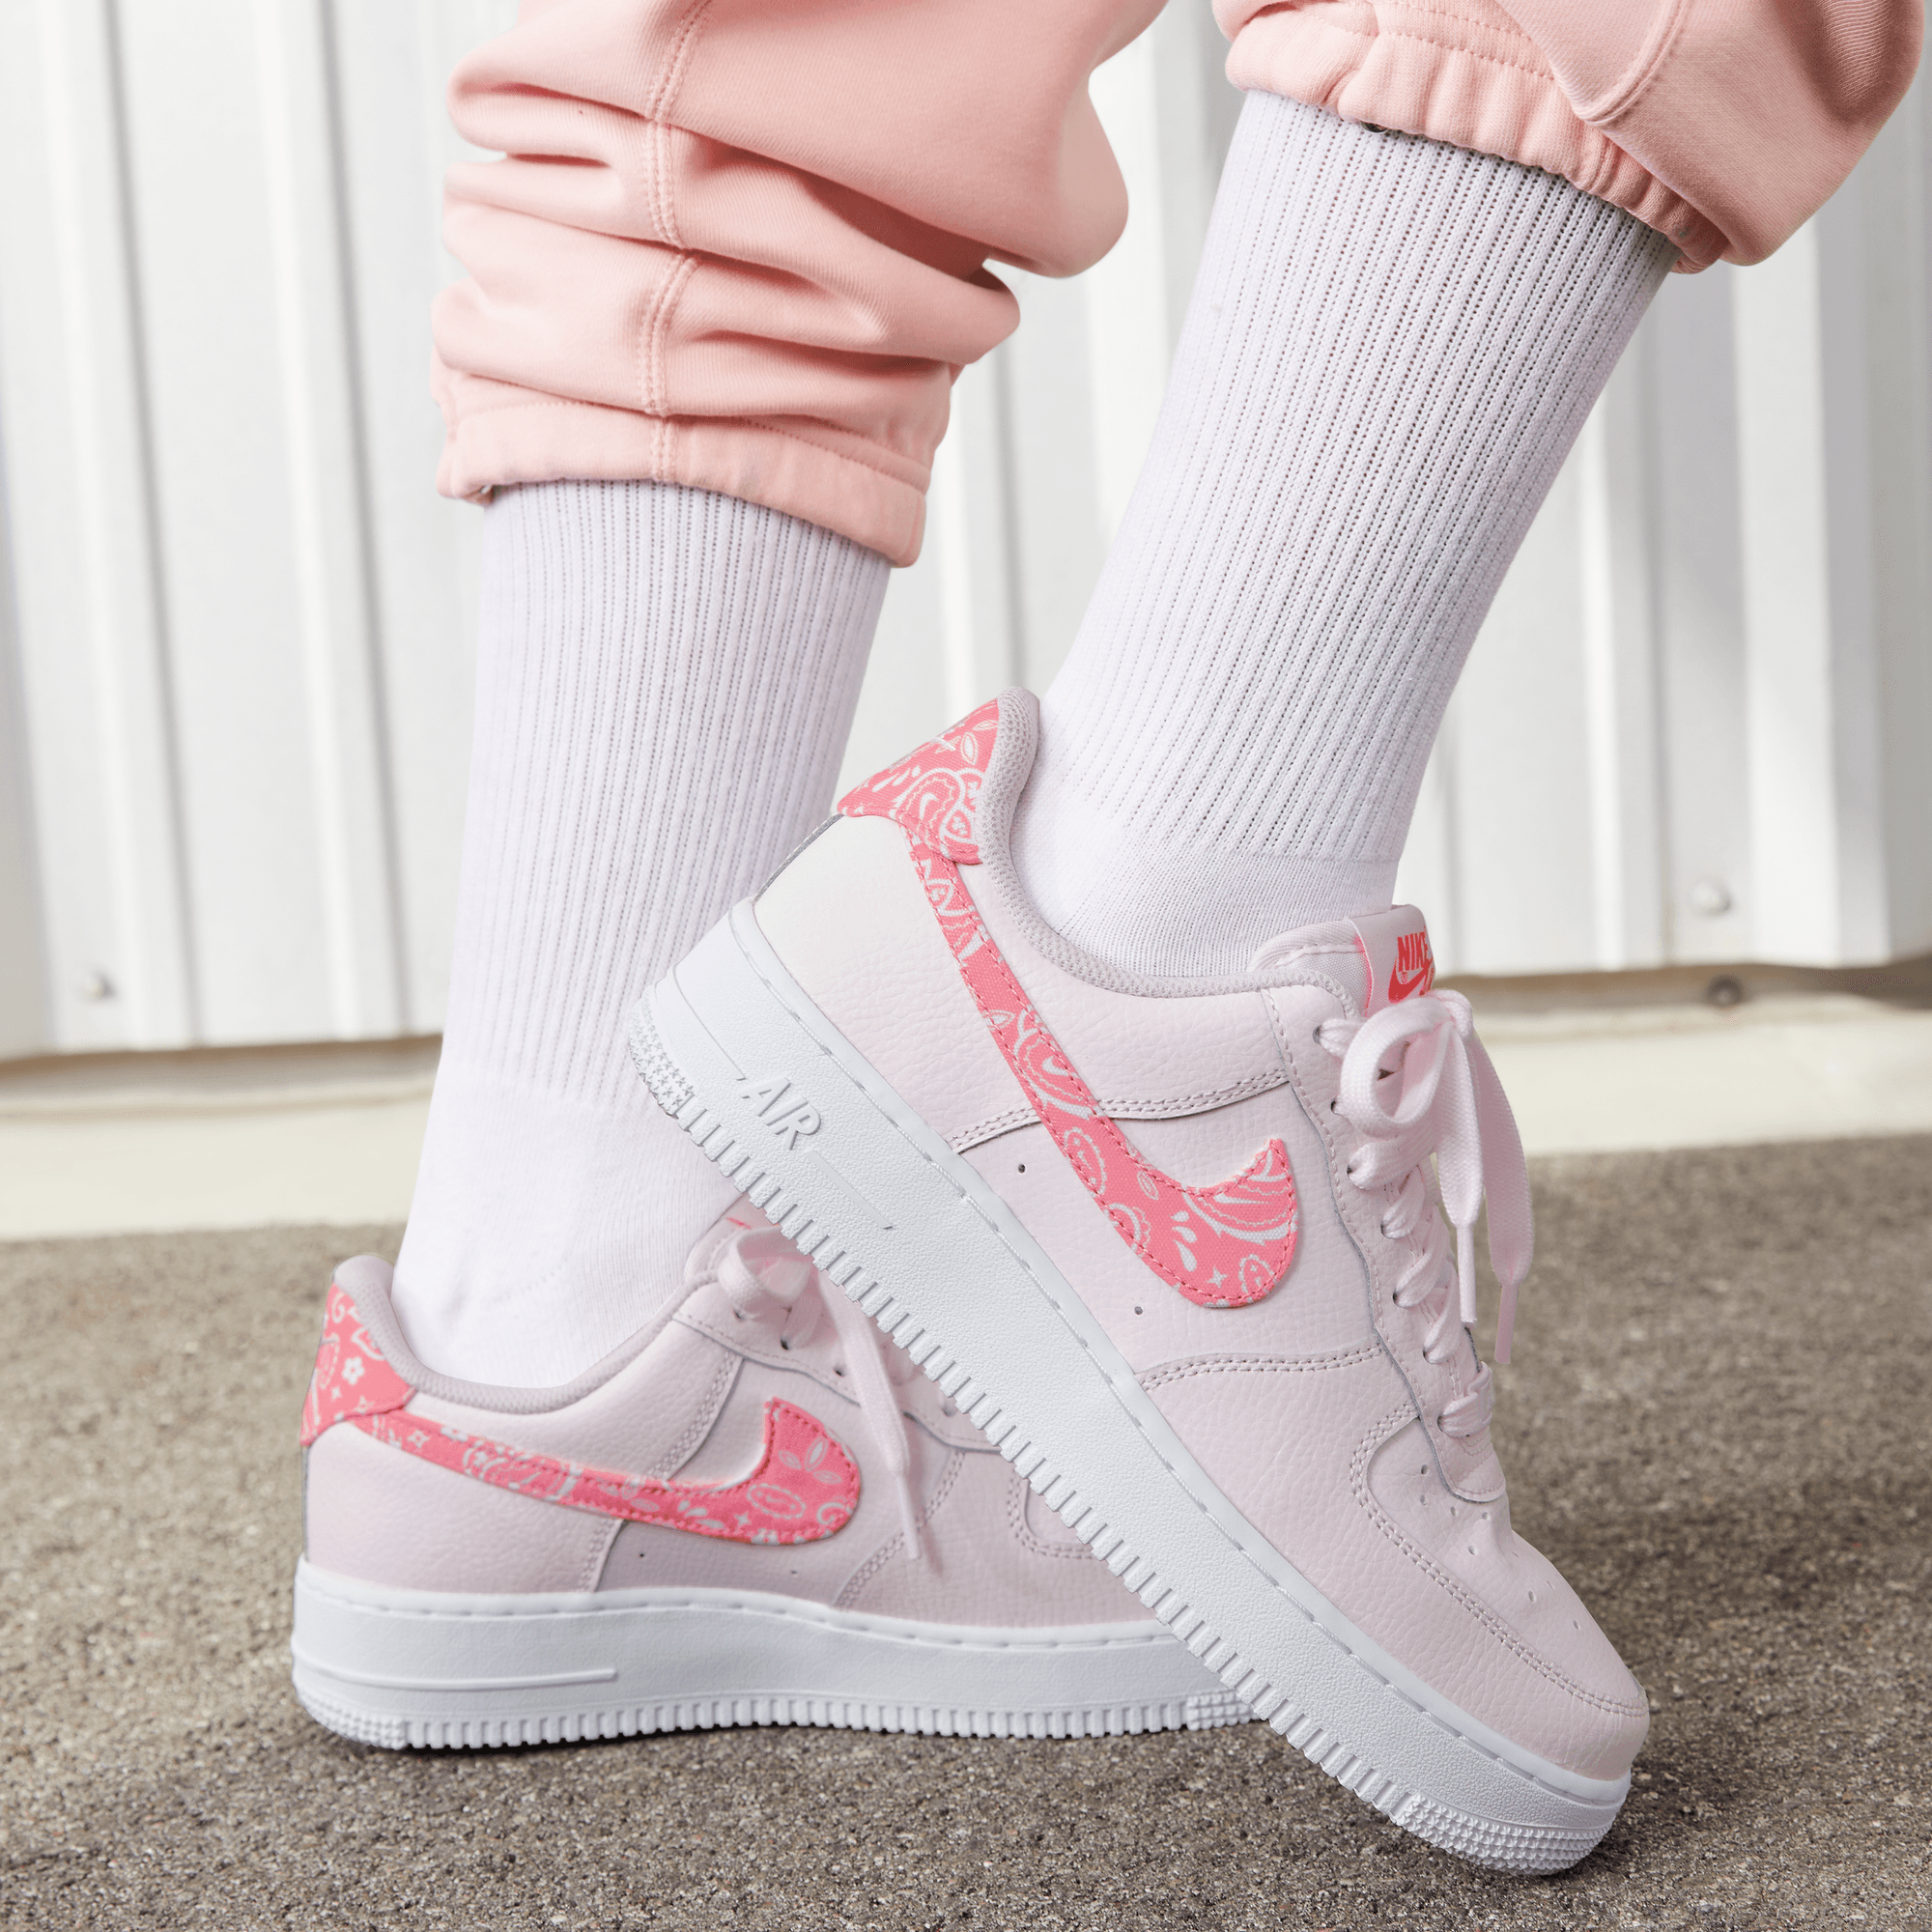 WMNS Nike Air Force 1 '07 - SoleFly